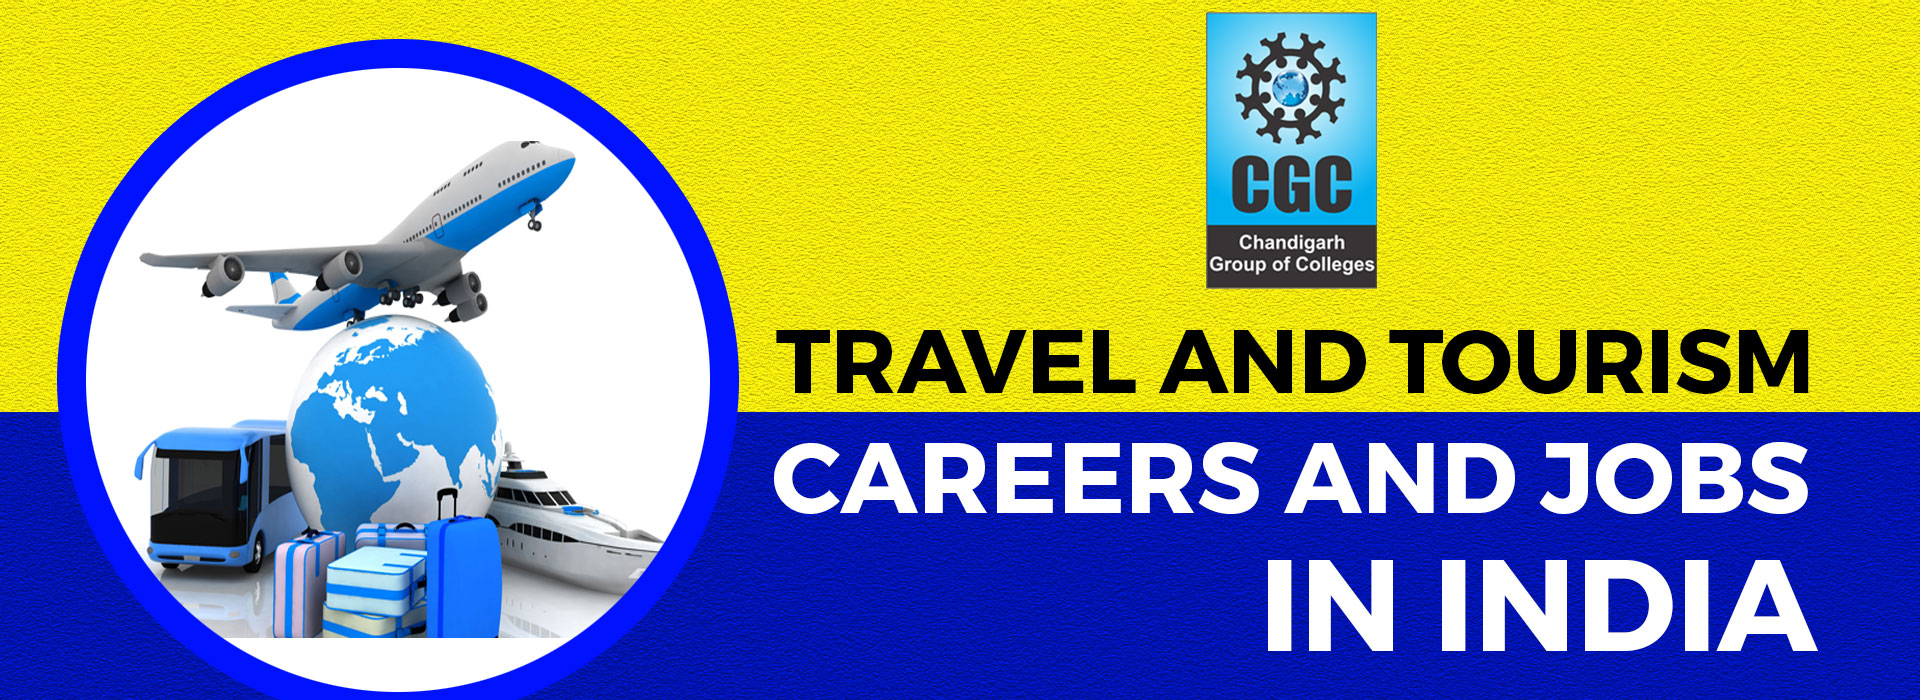 Travel and Tourism Careers and Jobs in India 